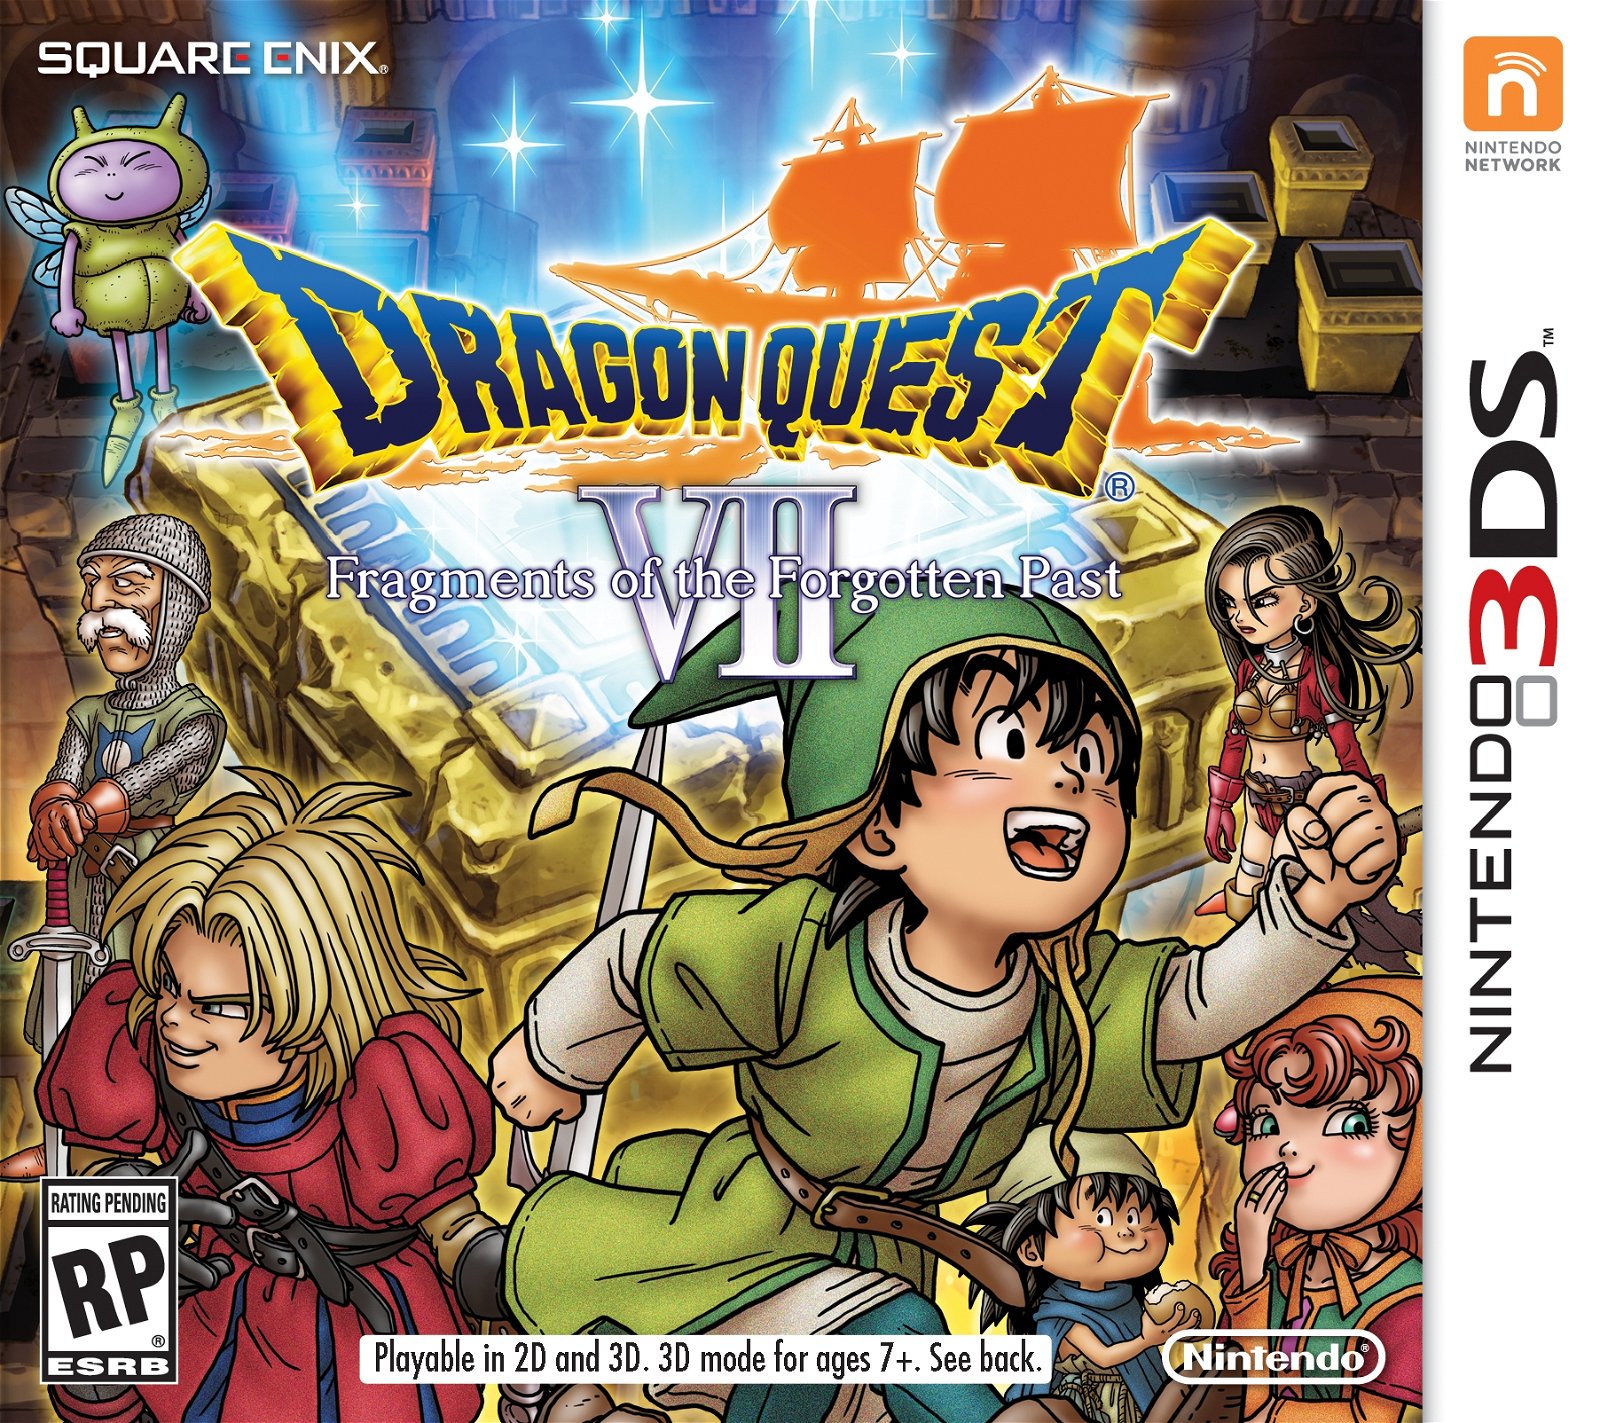 Image of Dragon Quest VII: Fragments of the Forgotten Past